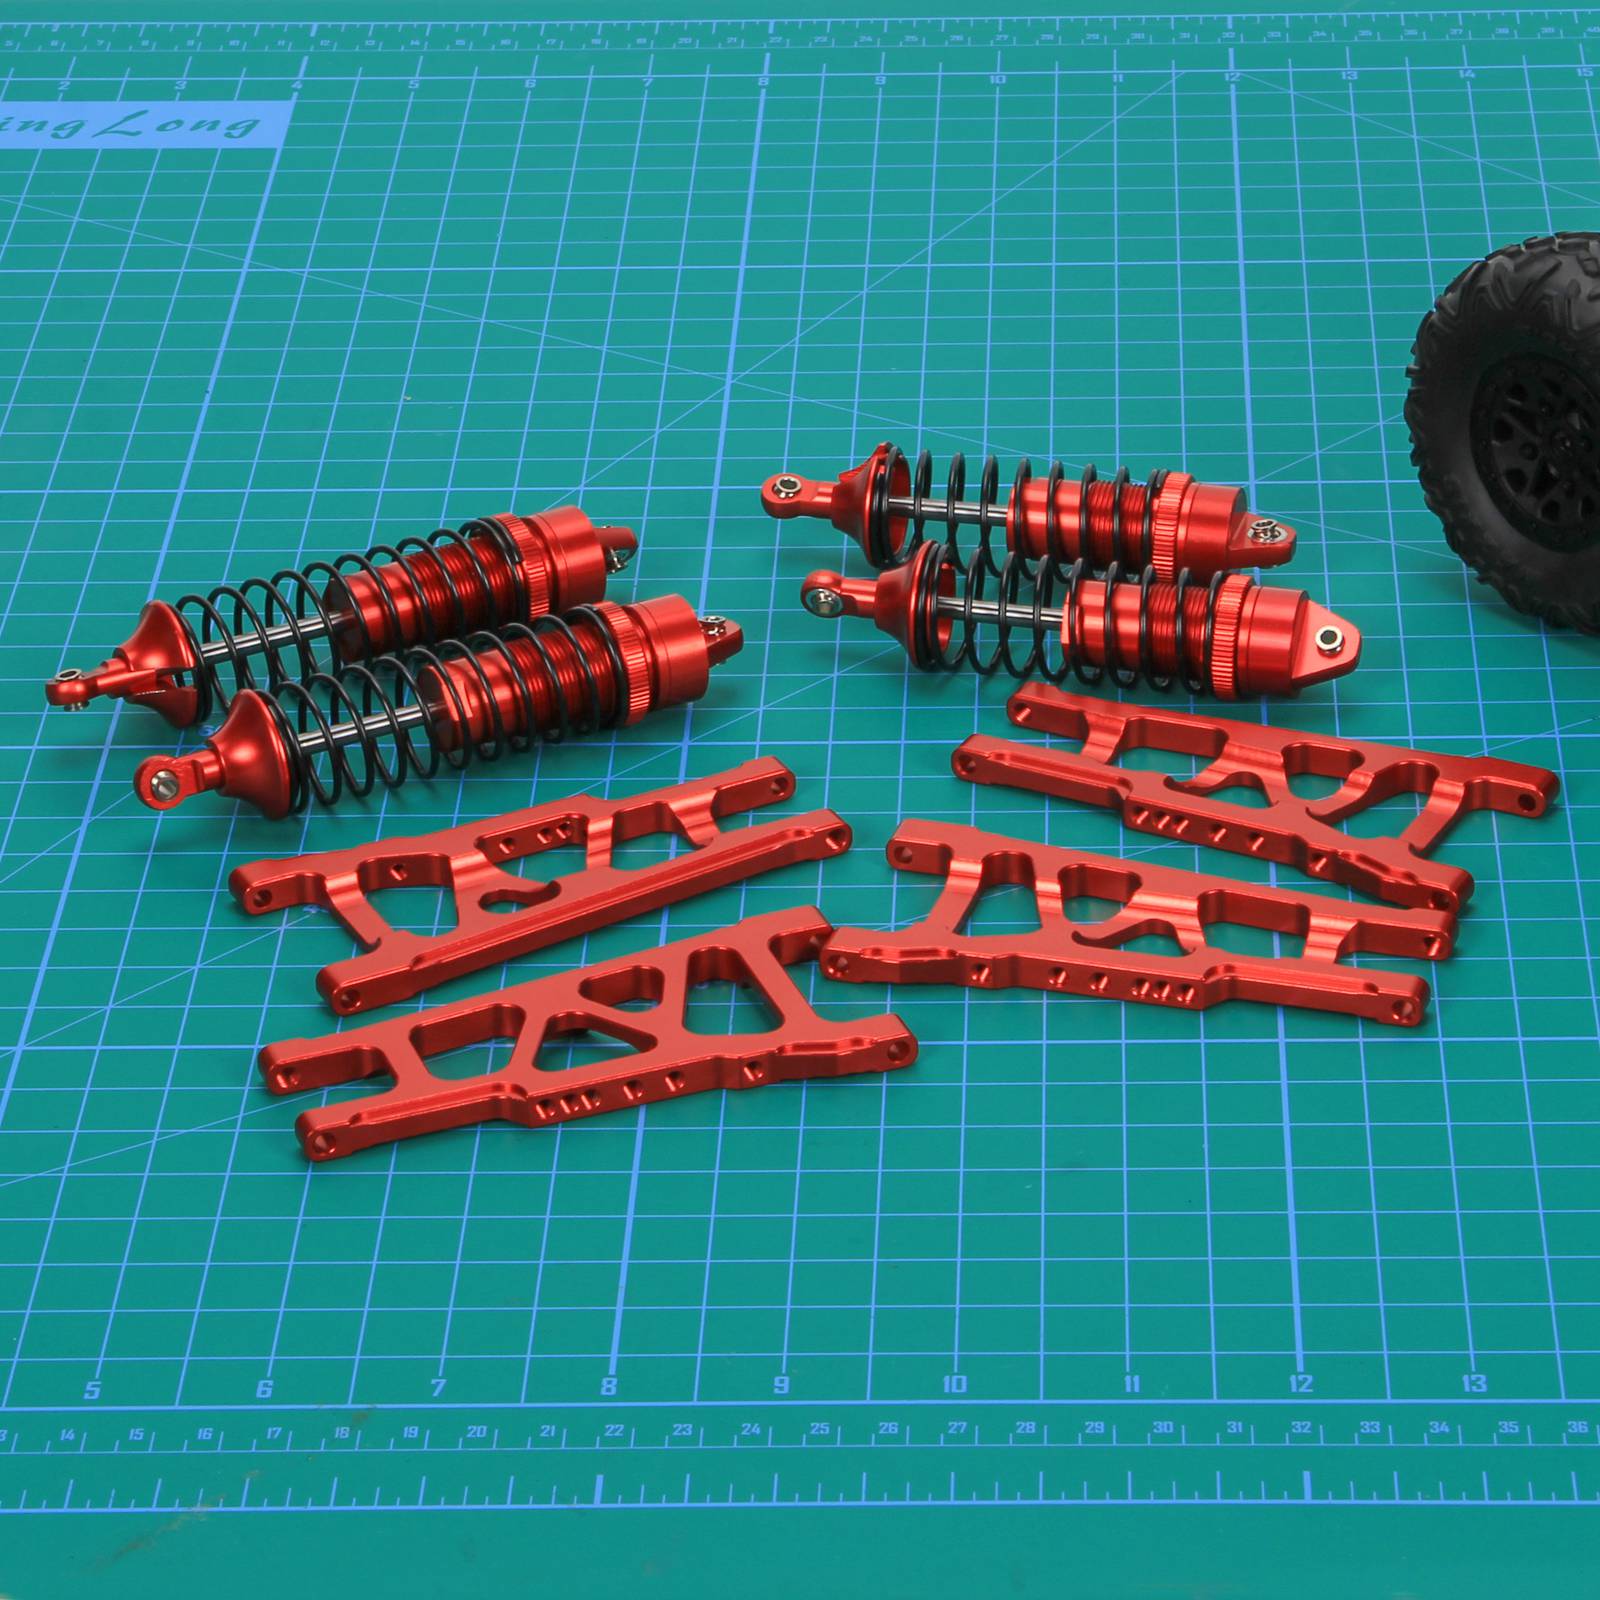 RCAWD TRAXXAS SLASH 4WD RCAWD Aluminum Suspension Arms Set and Full Metal Shock Absorber Assembled for 1/10 Traxxas Slash 4x4